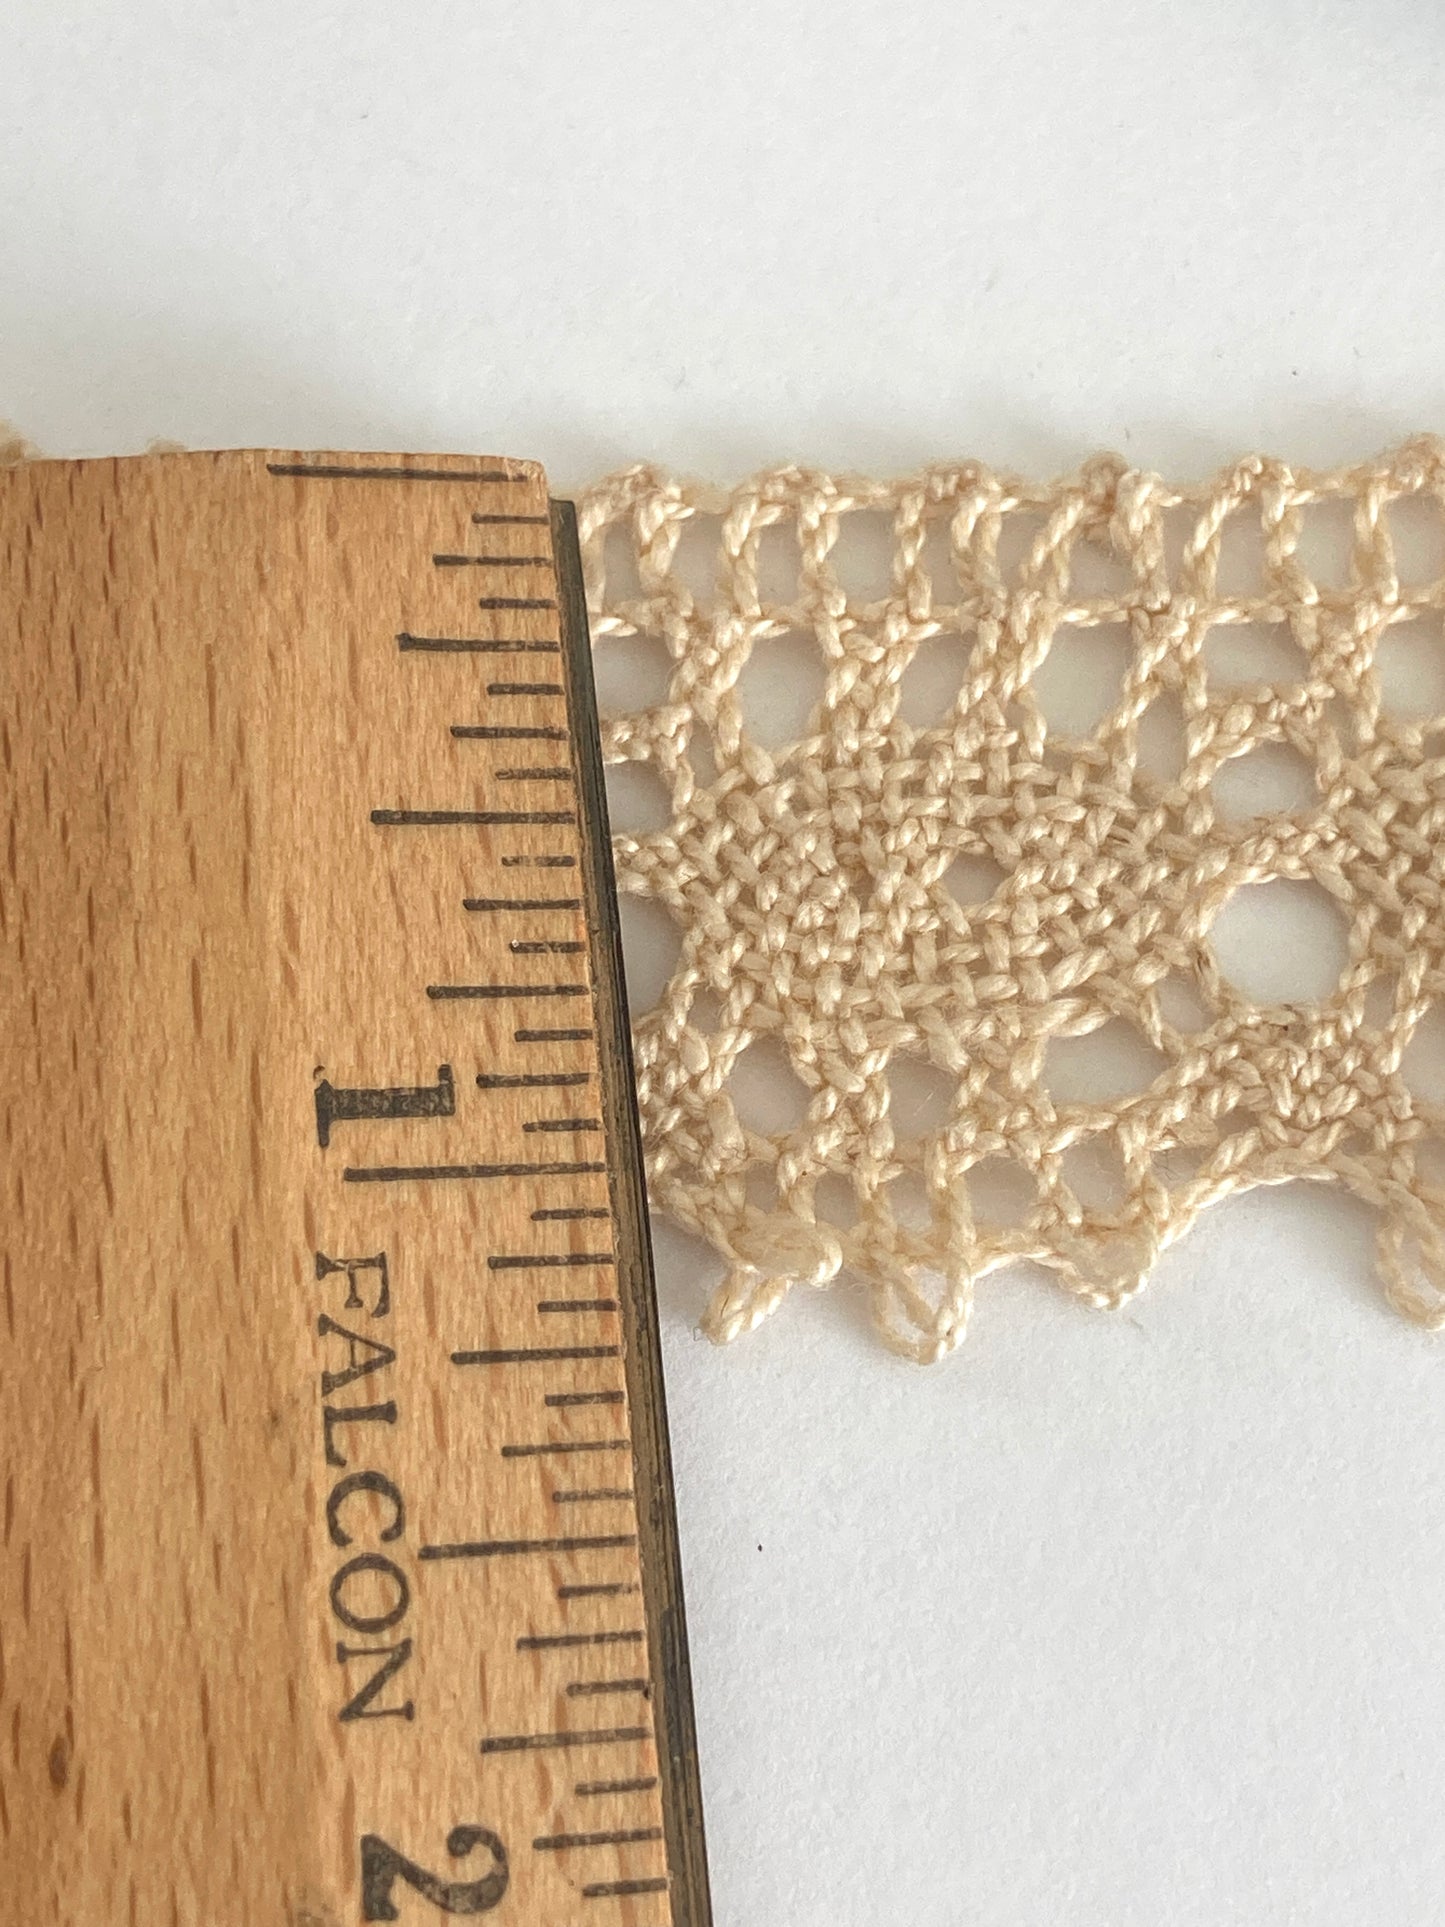 Huge Industrial Spool of Cotton Lace Trim 1 1/4 Inch Wide